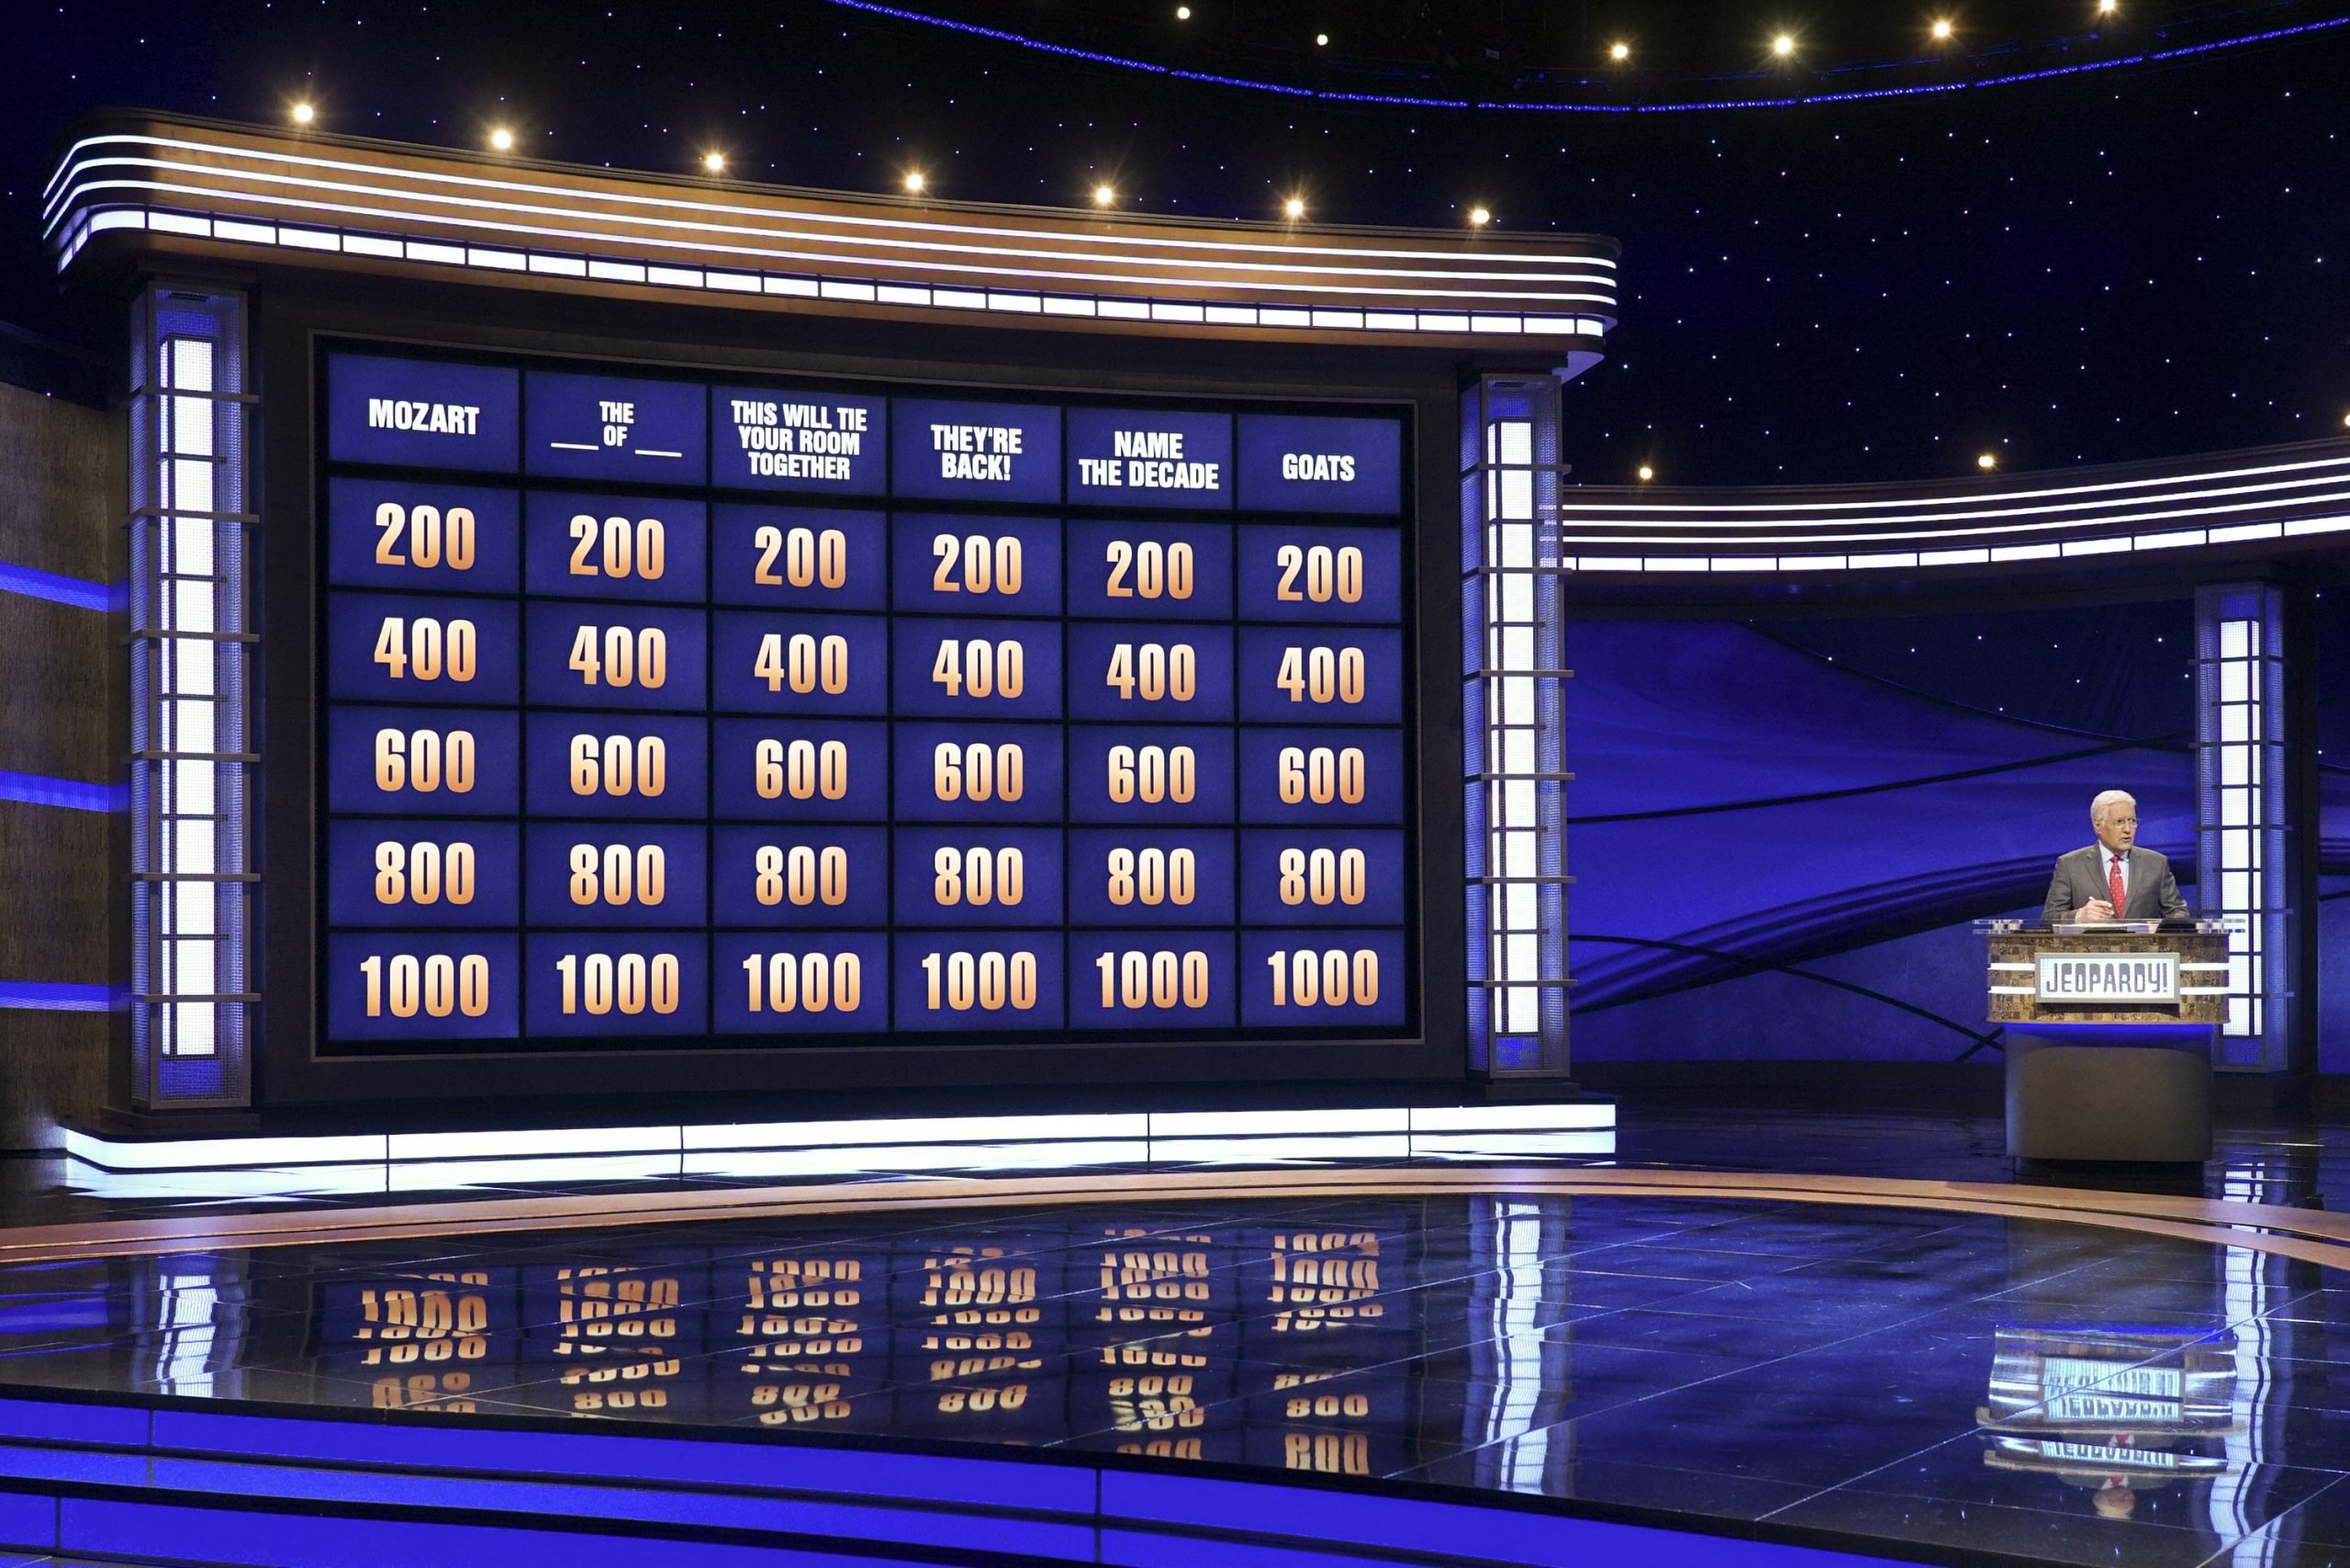 The game board of ABC's 'Jeopardy!'